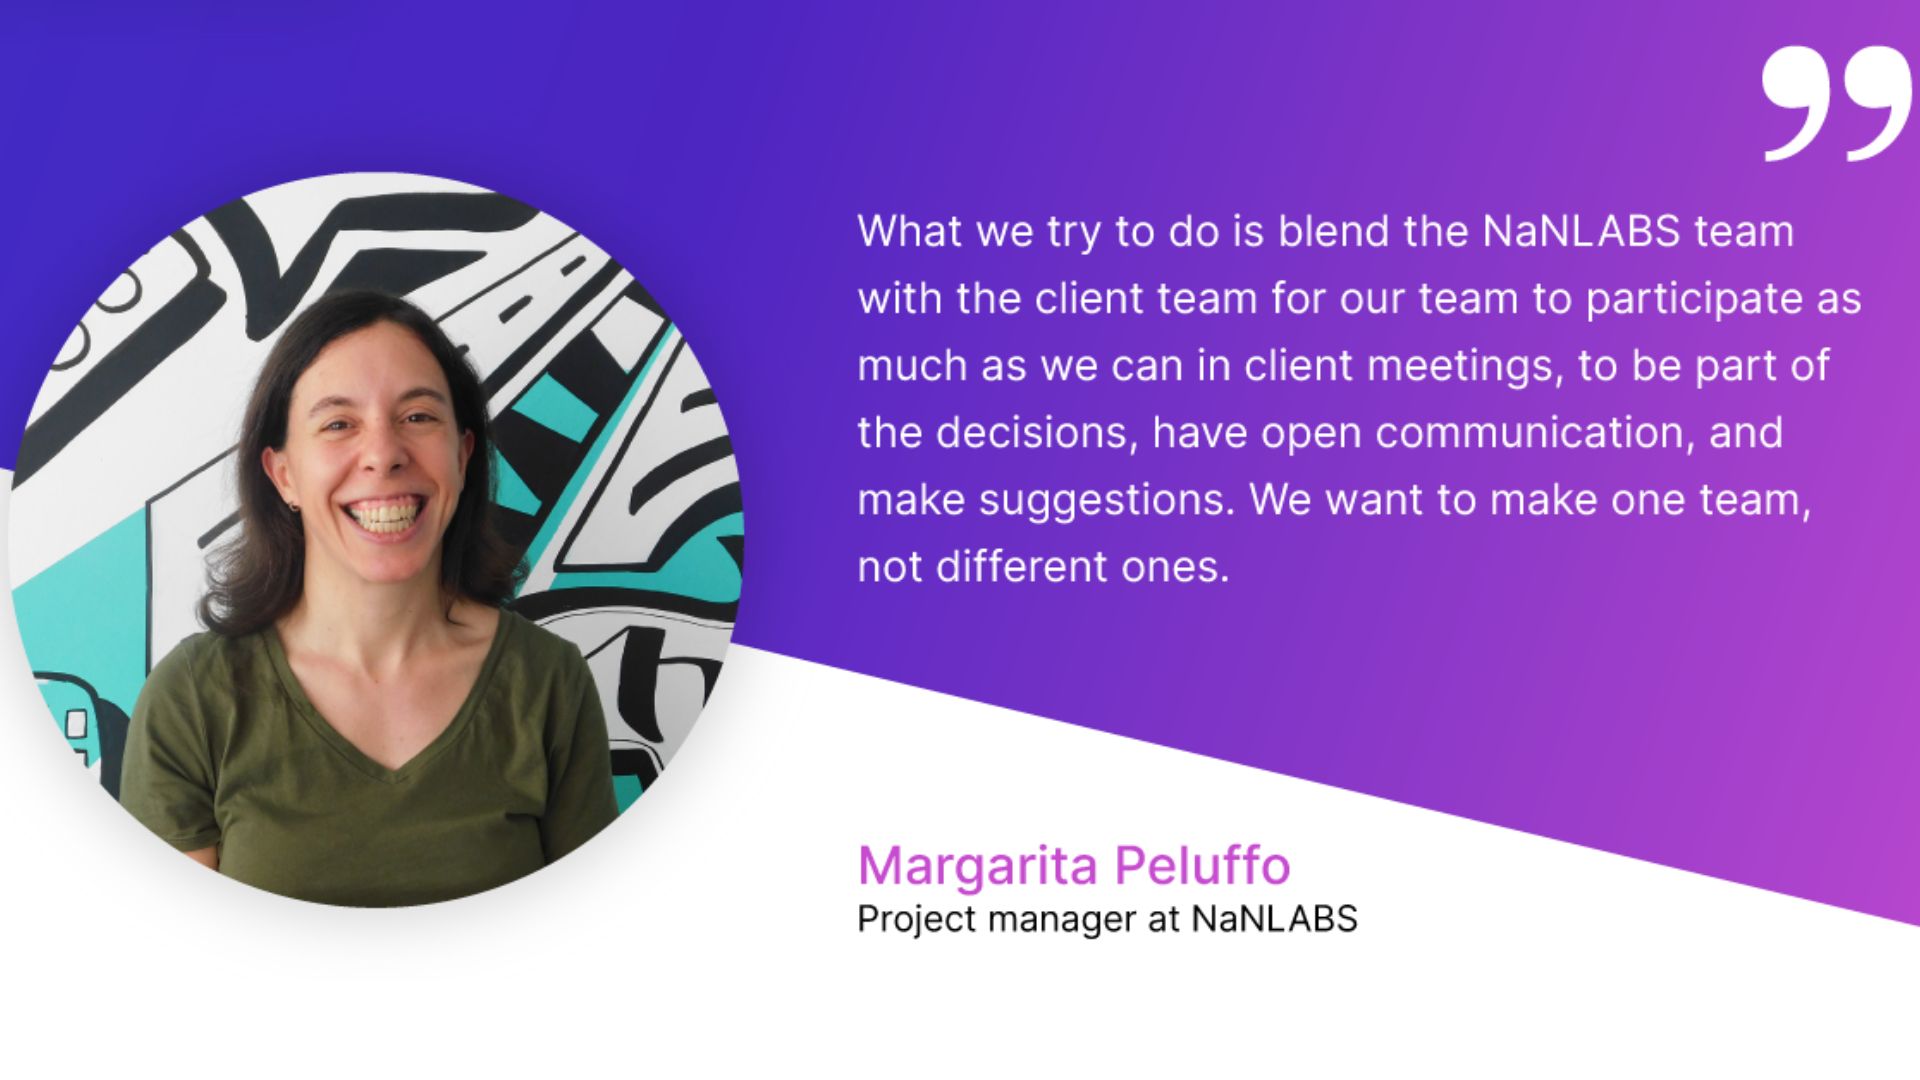 Quote about team augmentation by Margarita, Project manager at NaNLABS